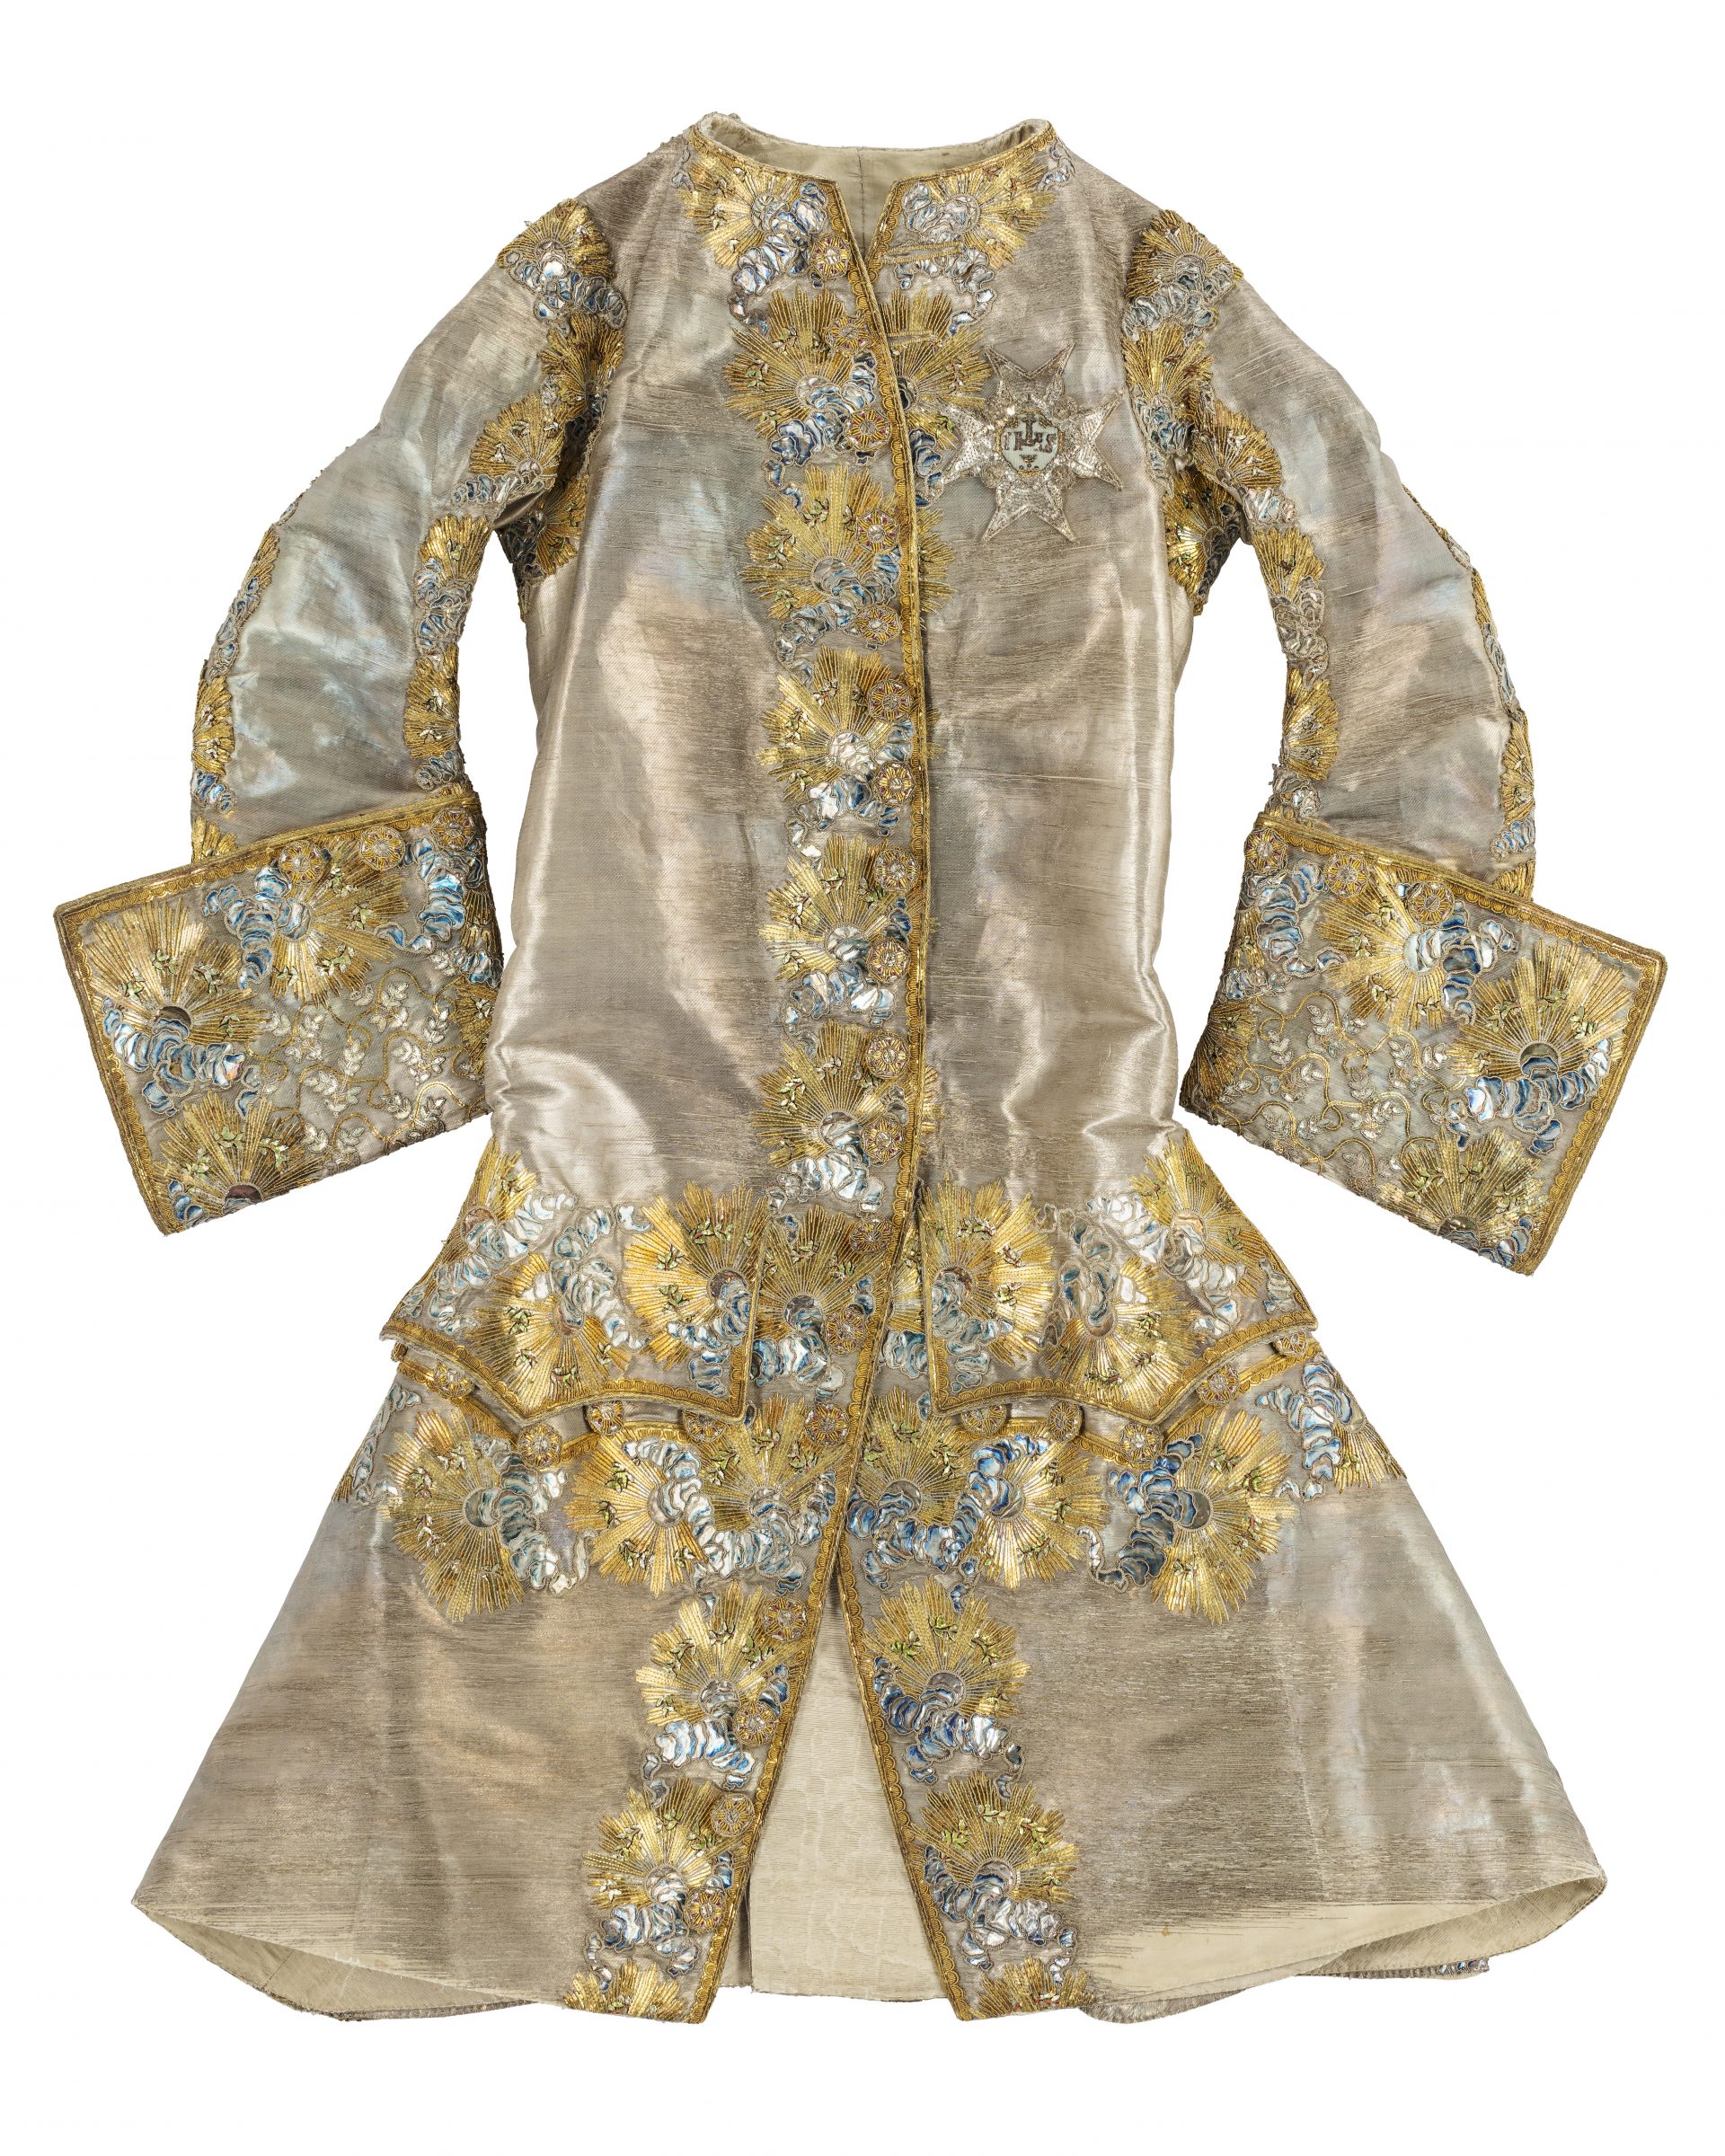 A silver justaucorps with lavish embroidery in silver and gold.